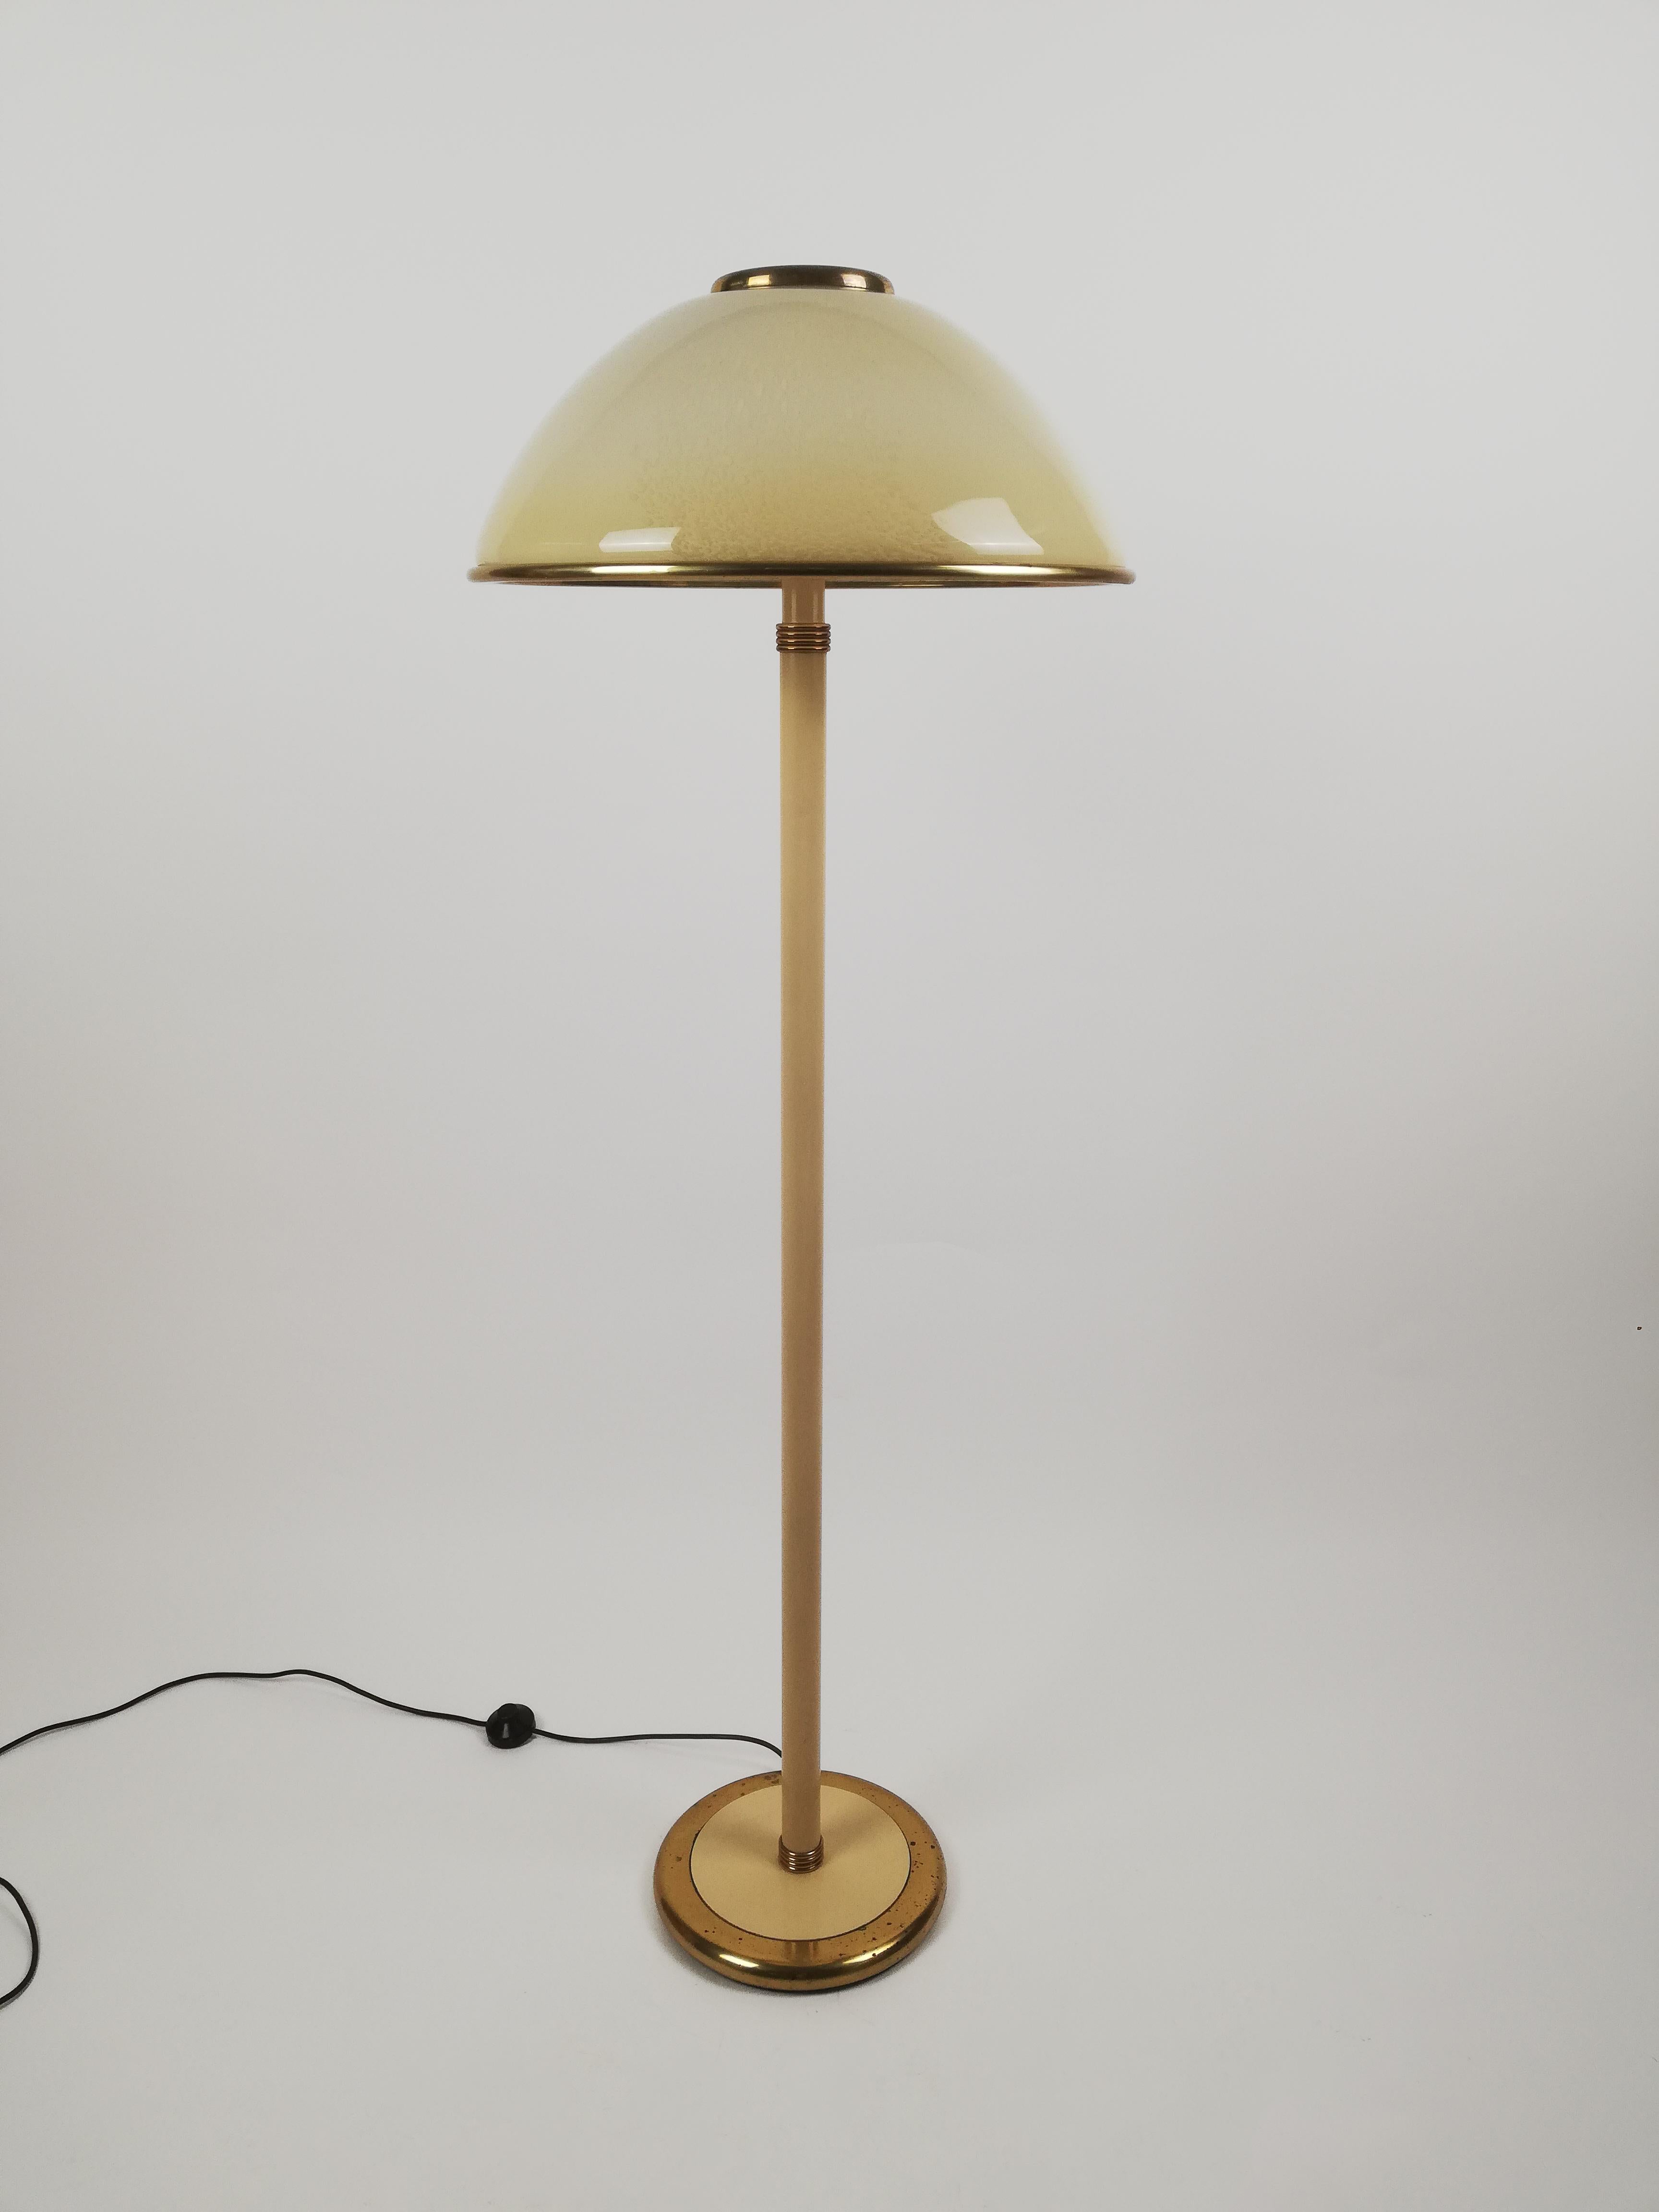 1970s Italian Floor Lamp in Brass and Artistic Murano Glass by F. Fabbian For Sale 5